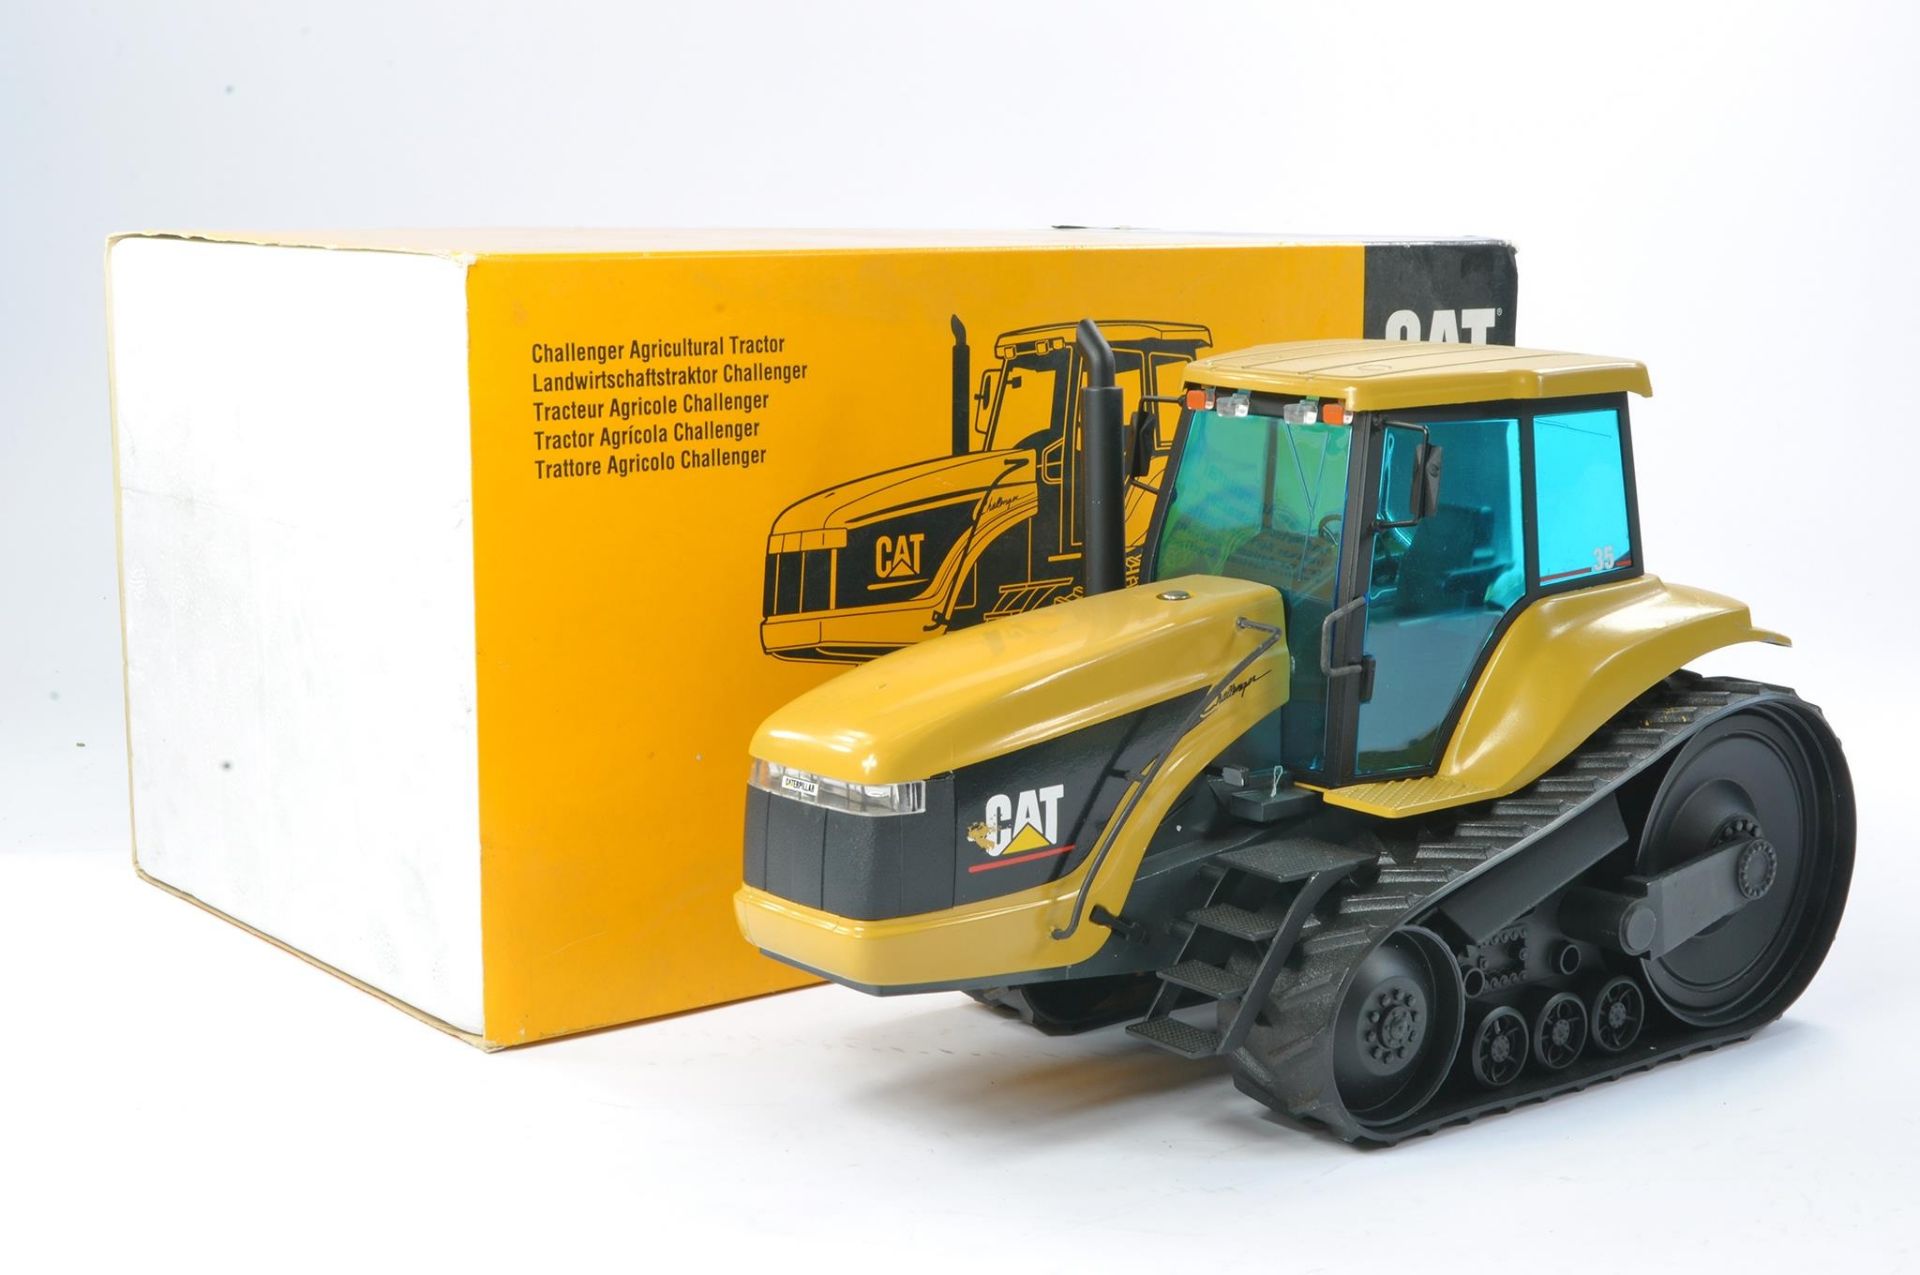 NZG 1/16 Construction Issue comprising CAT Challenger 35 Tracked Tractor. Has been displayed but